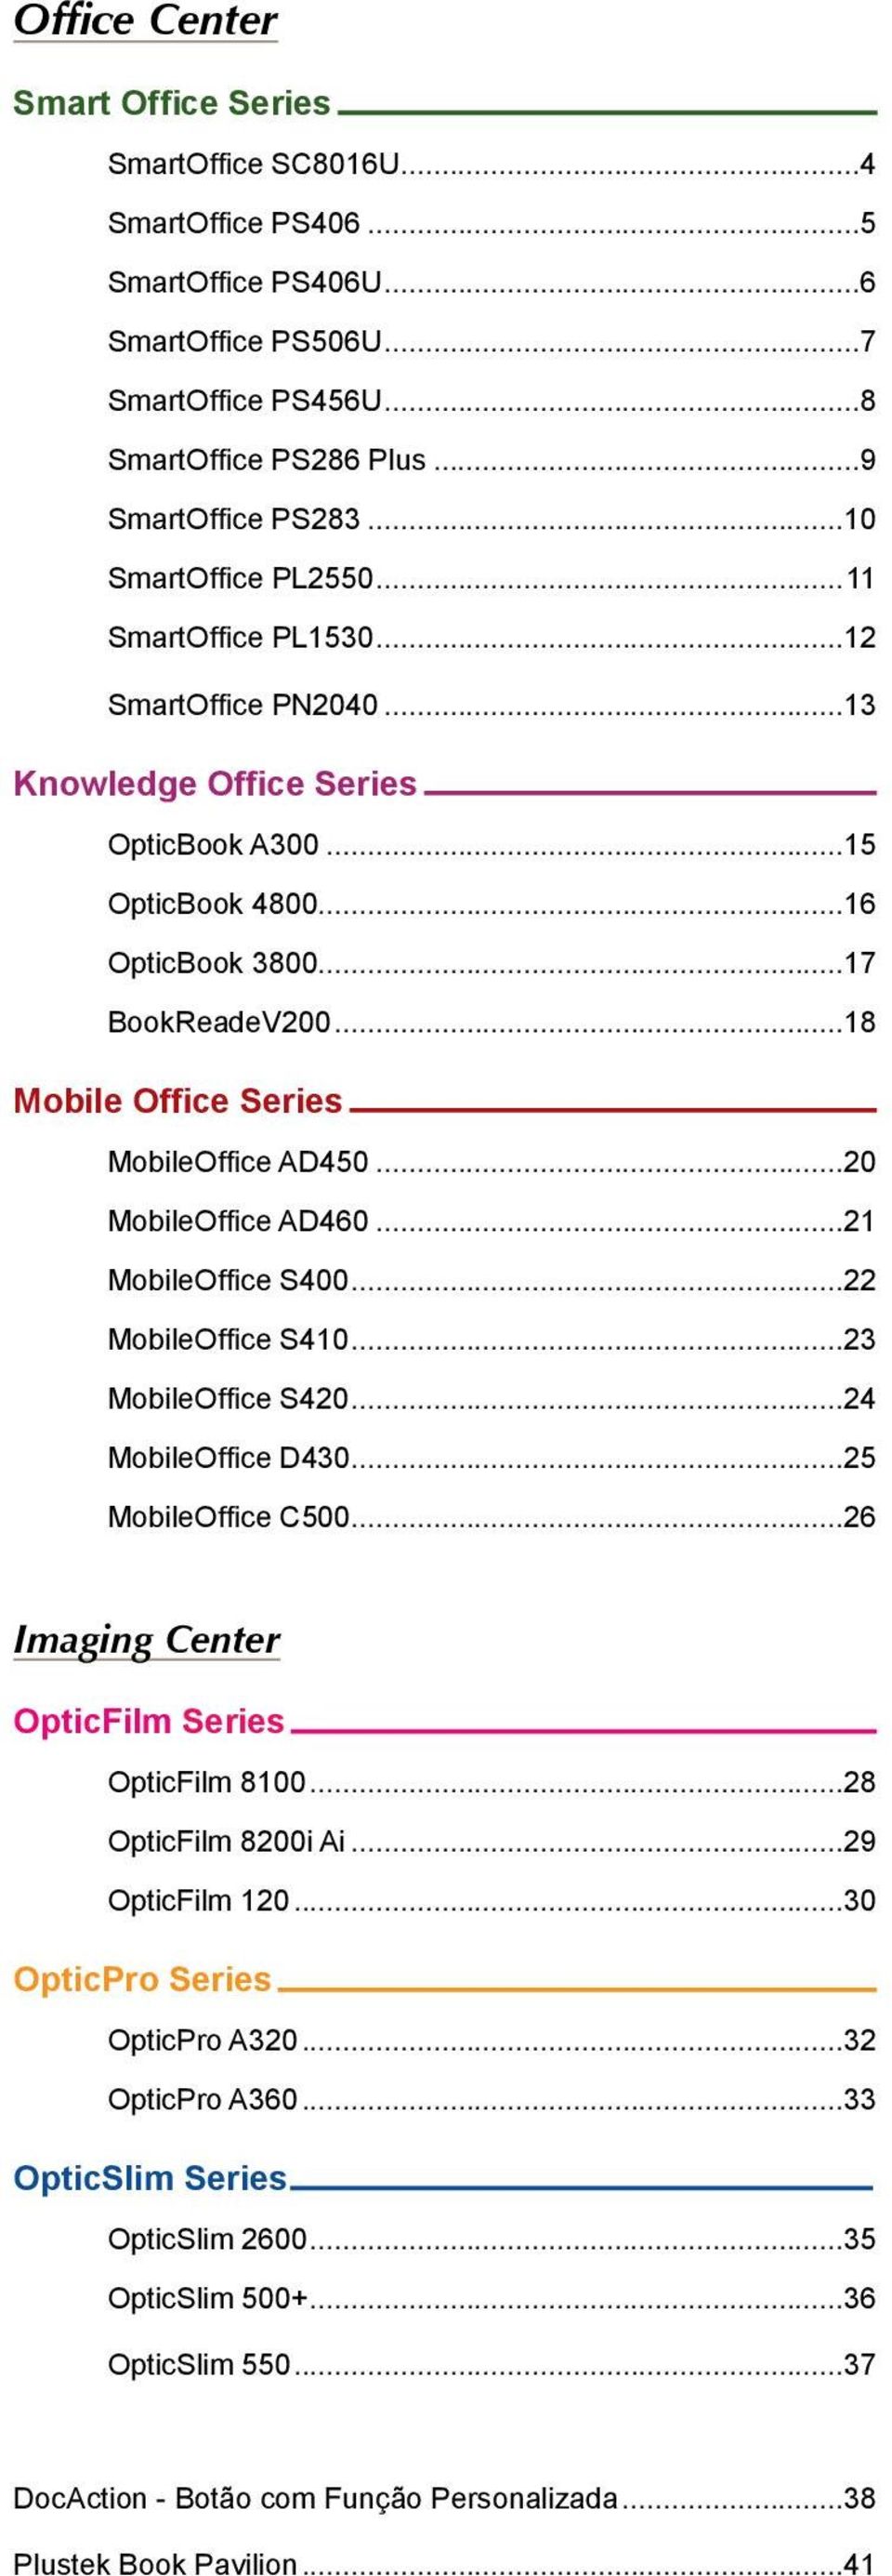 ..18 Mobile Office Series MobileOffice AD450...20 MobileOffice AD460...21 MobileOffice S400...22 MobileOffice S410...23 MobileOffice S420...24 MobileOffice D430...25 MobileOffice C500.